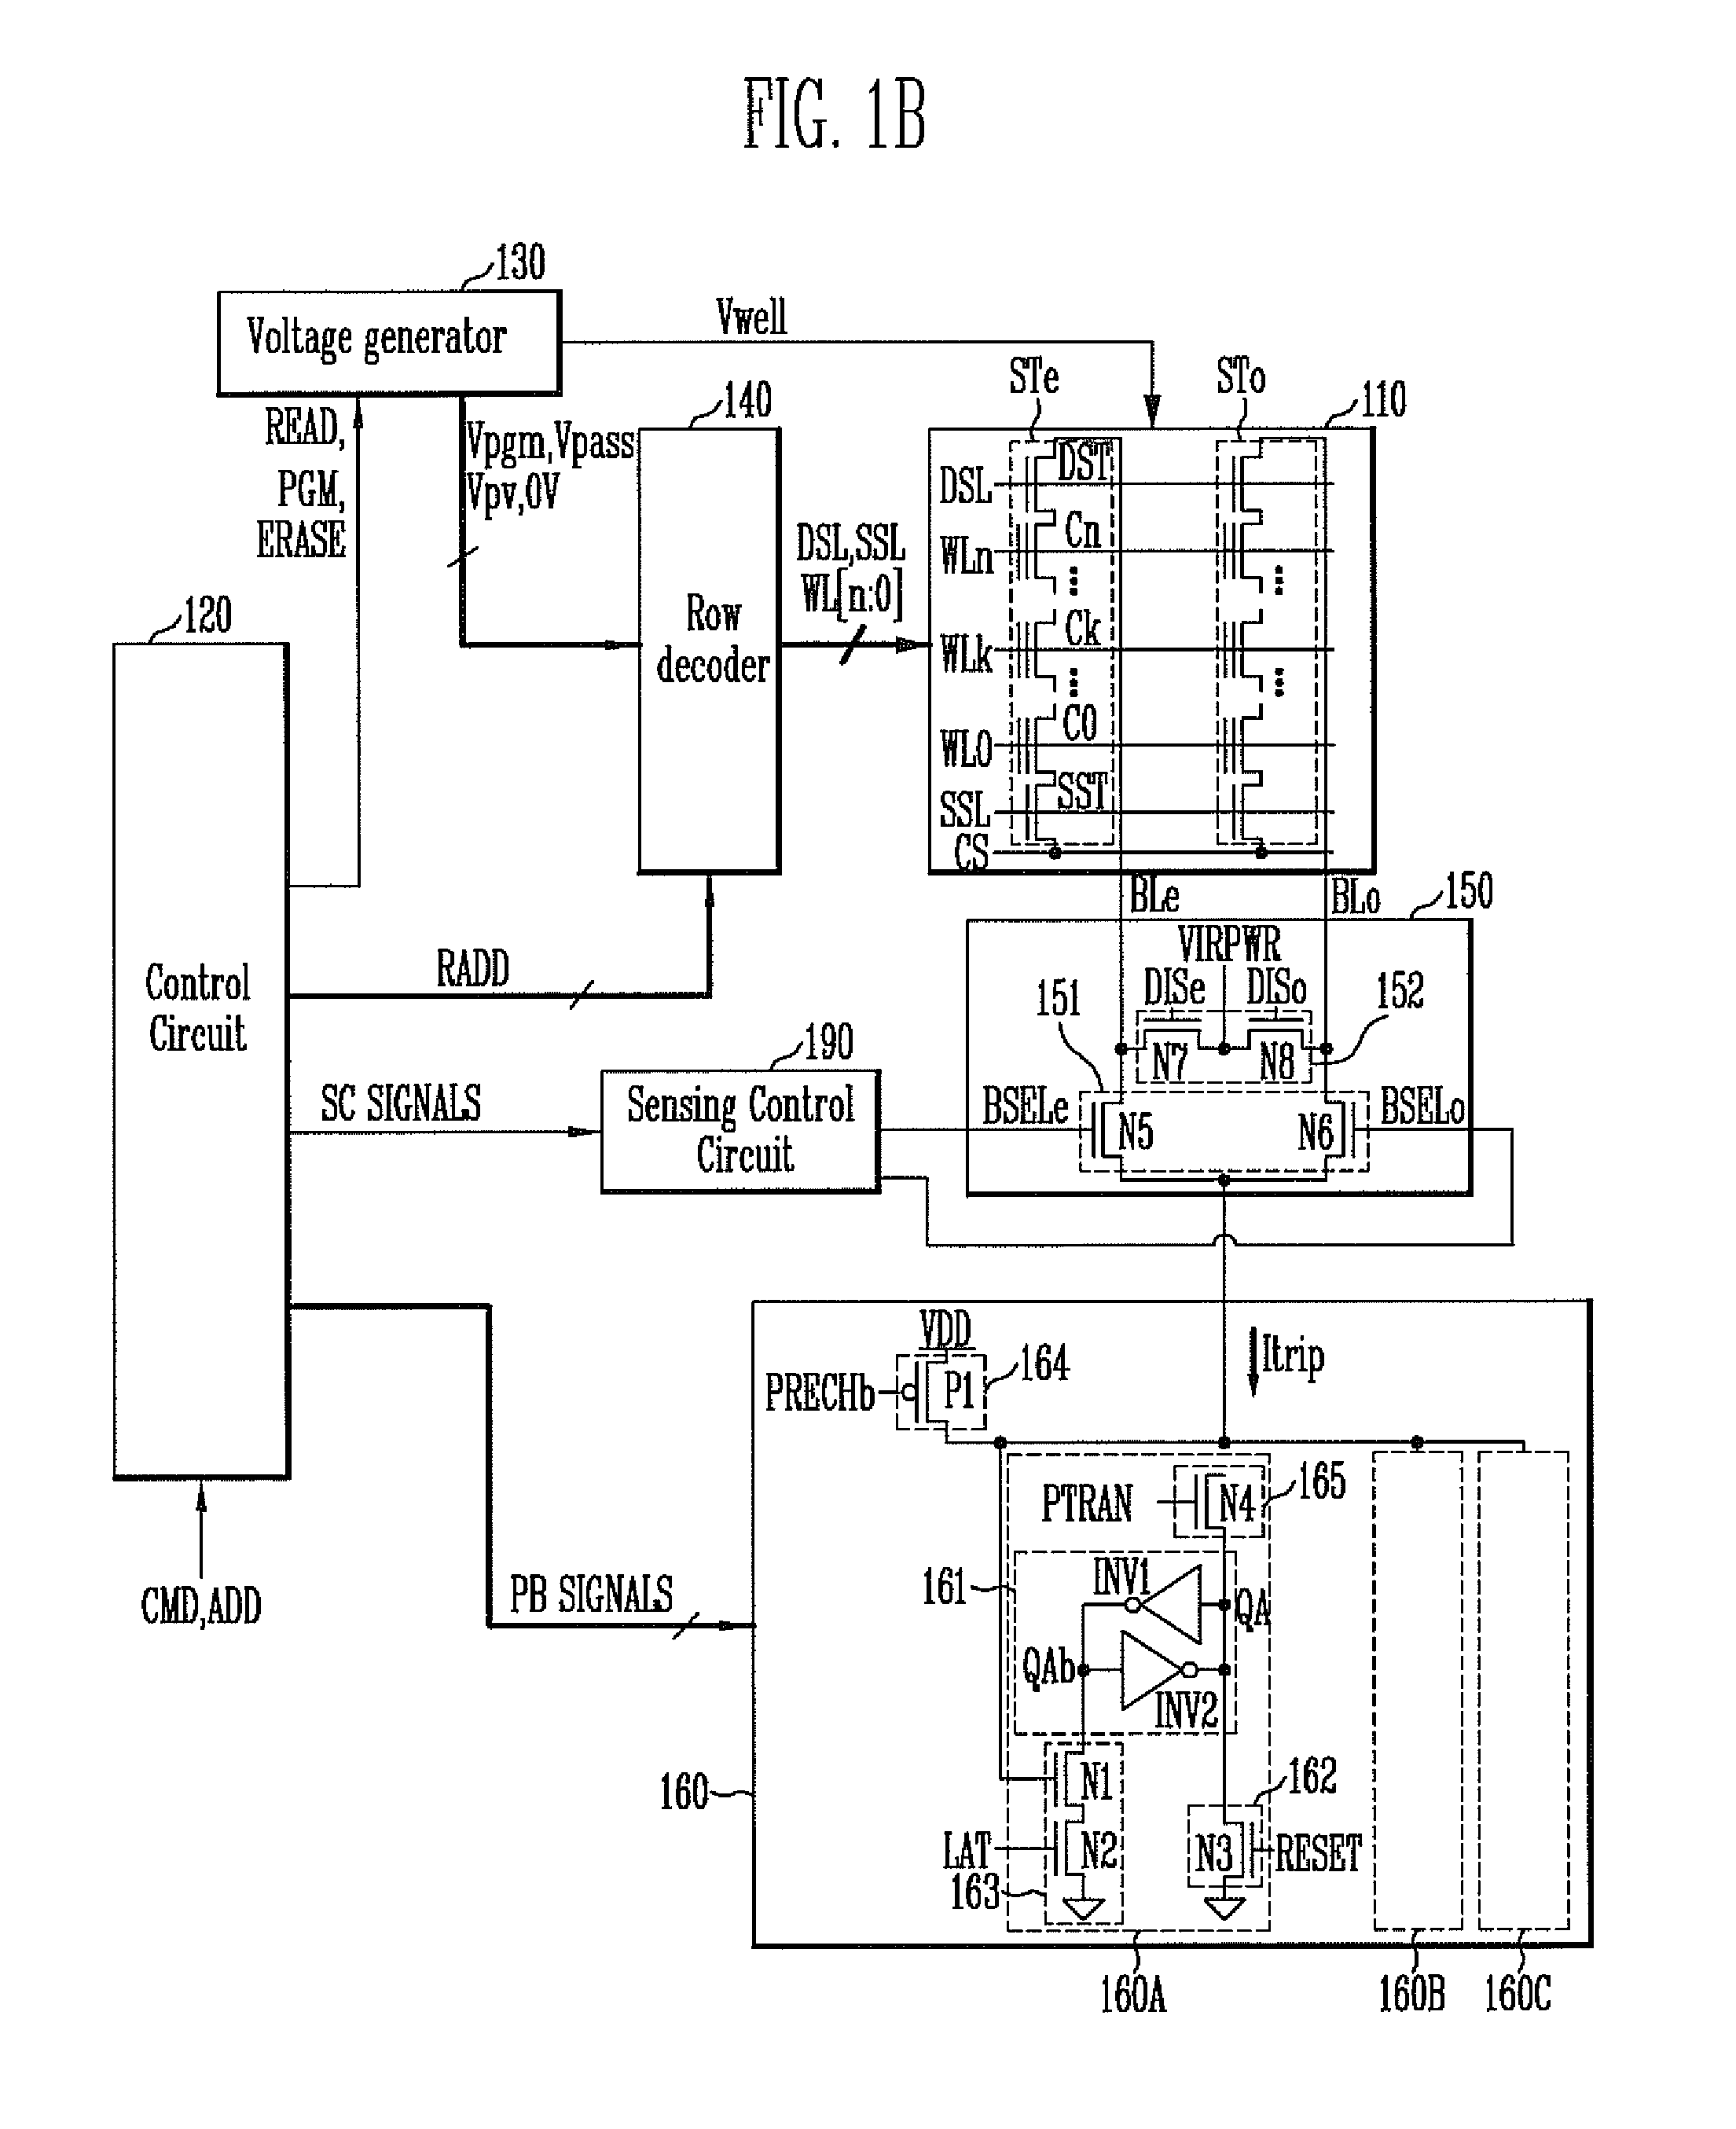 Semiconductor memory device and method of operating the same